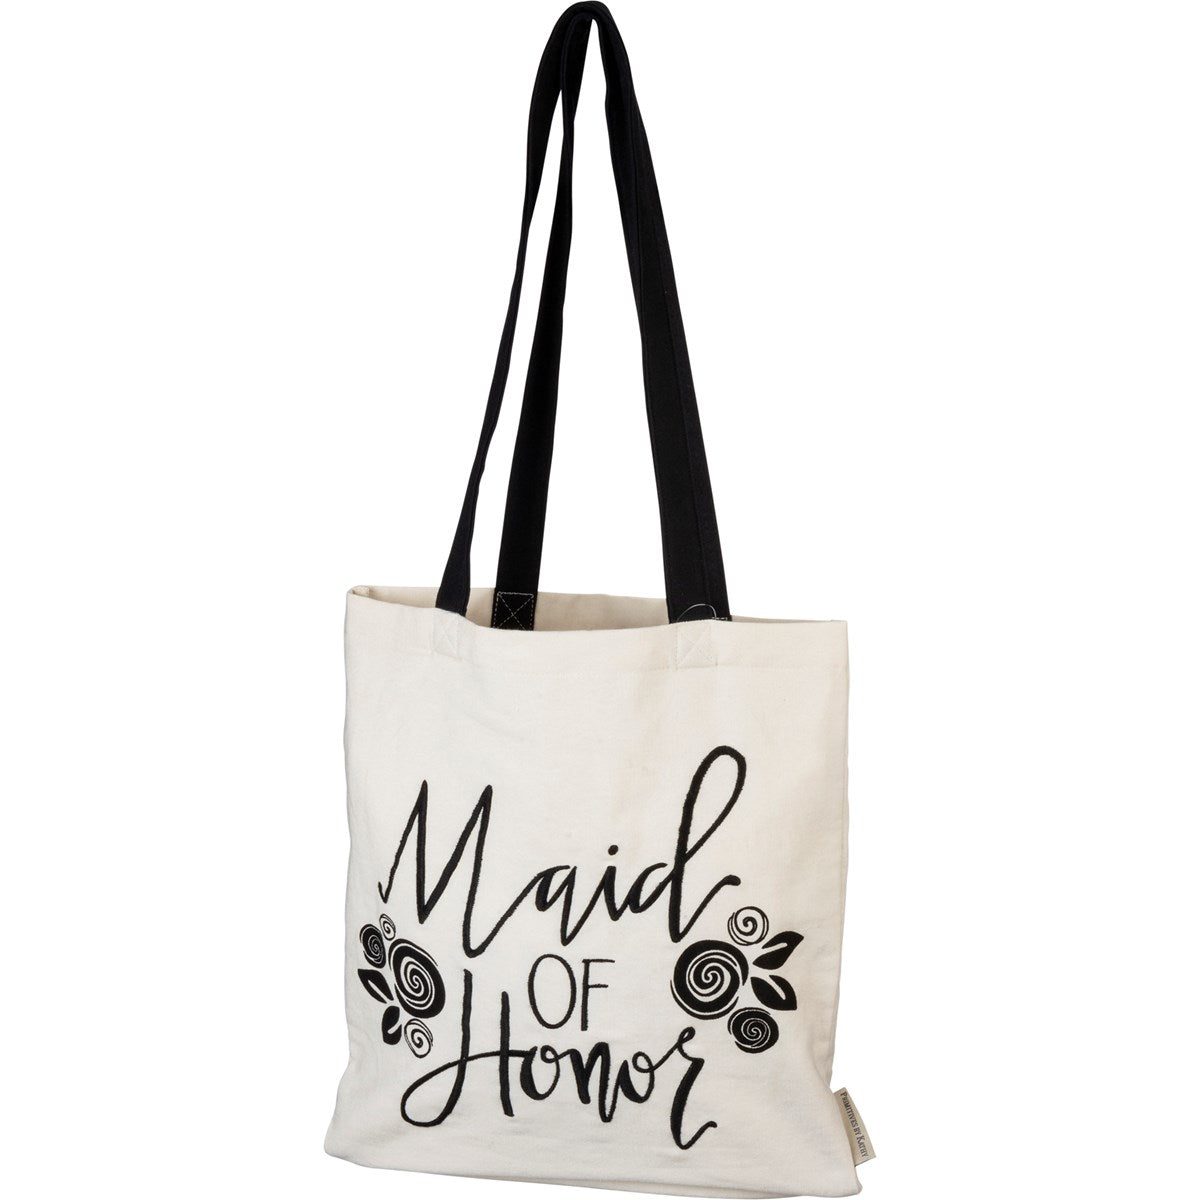 "MAID OF HONOR" EMBROIDERED TOTE BAG